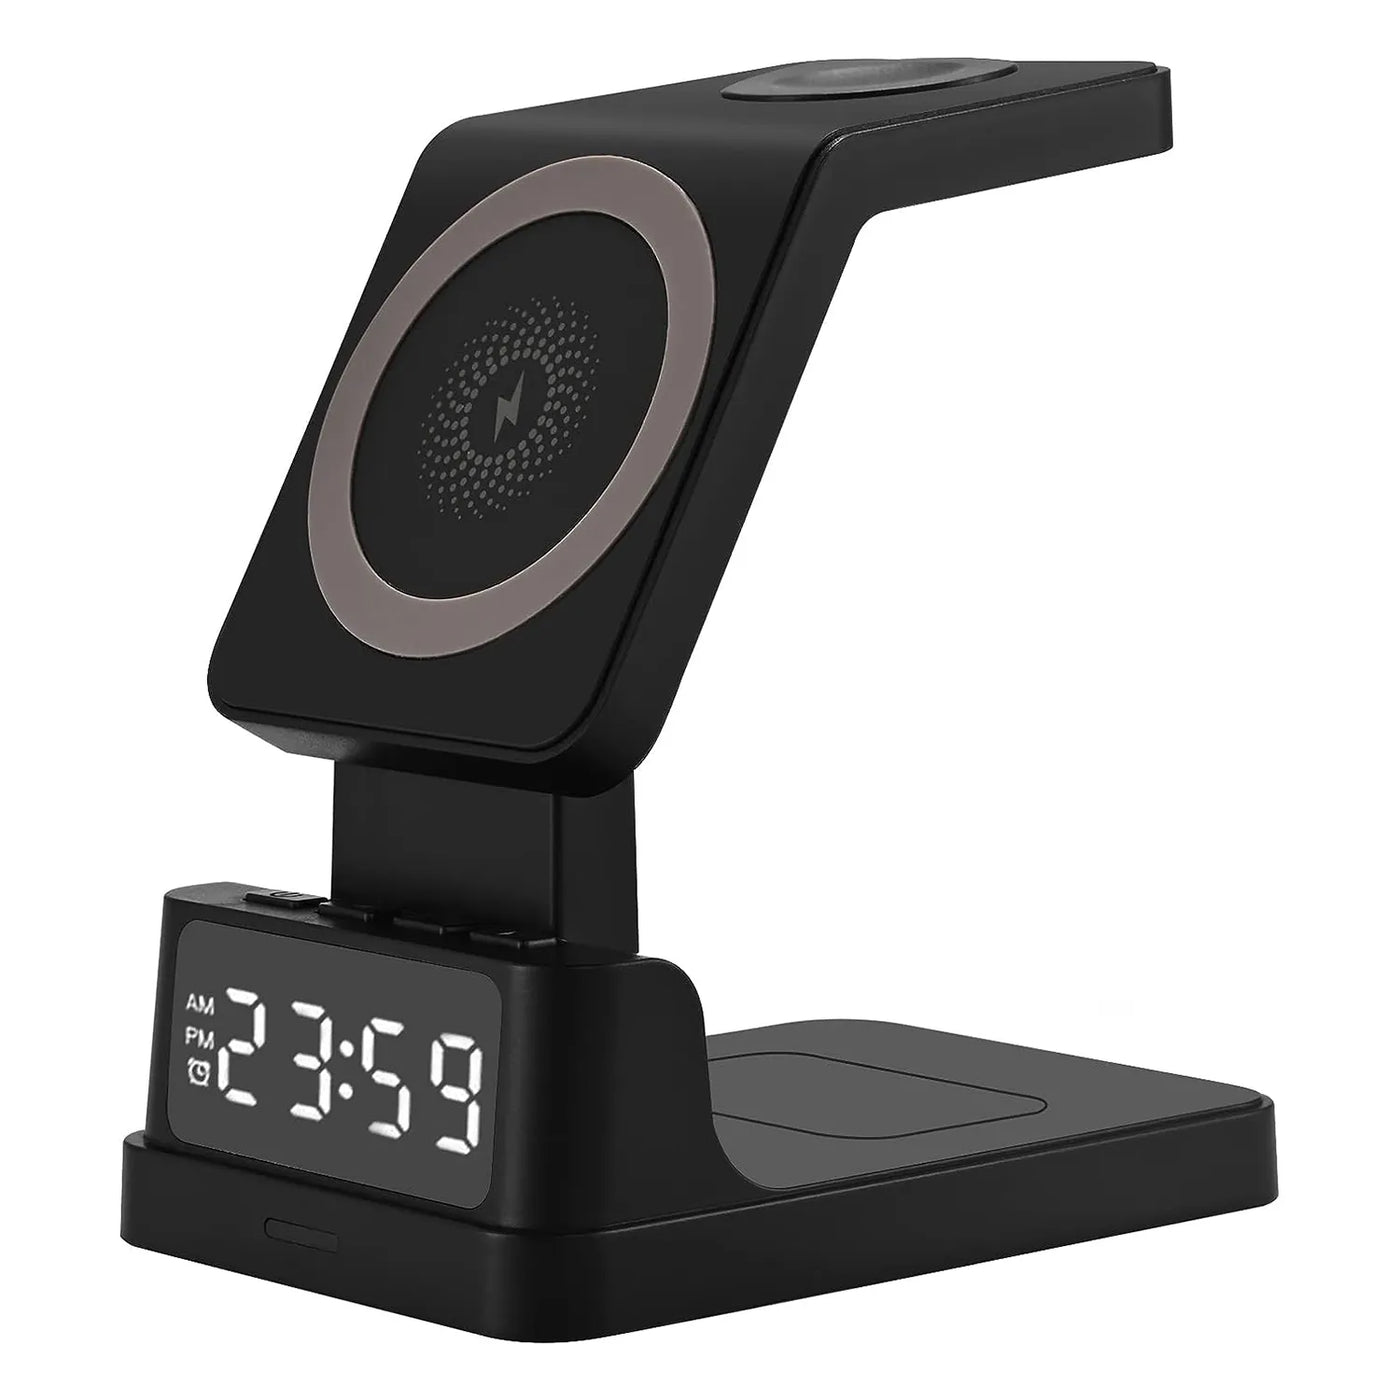 Muvit 15W 4 IN 1 Wireless Charging Station With Digital Clock